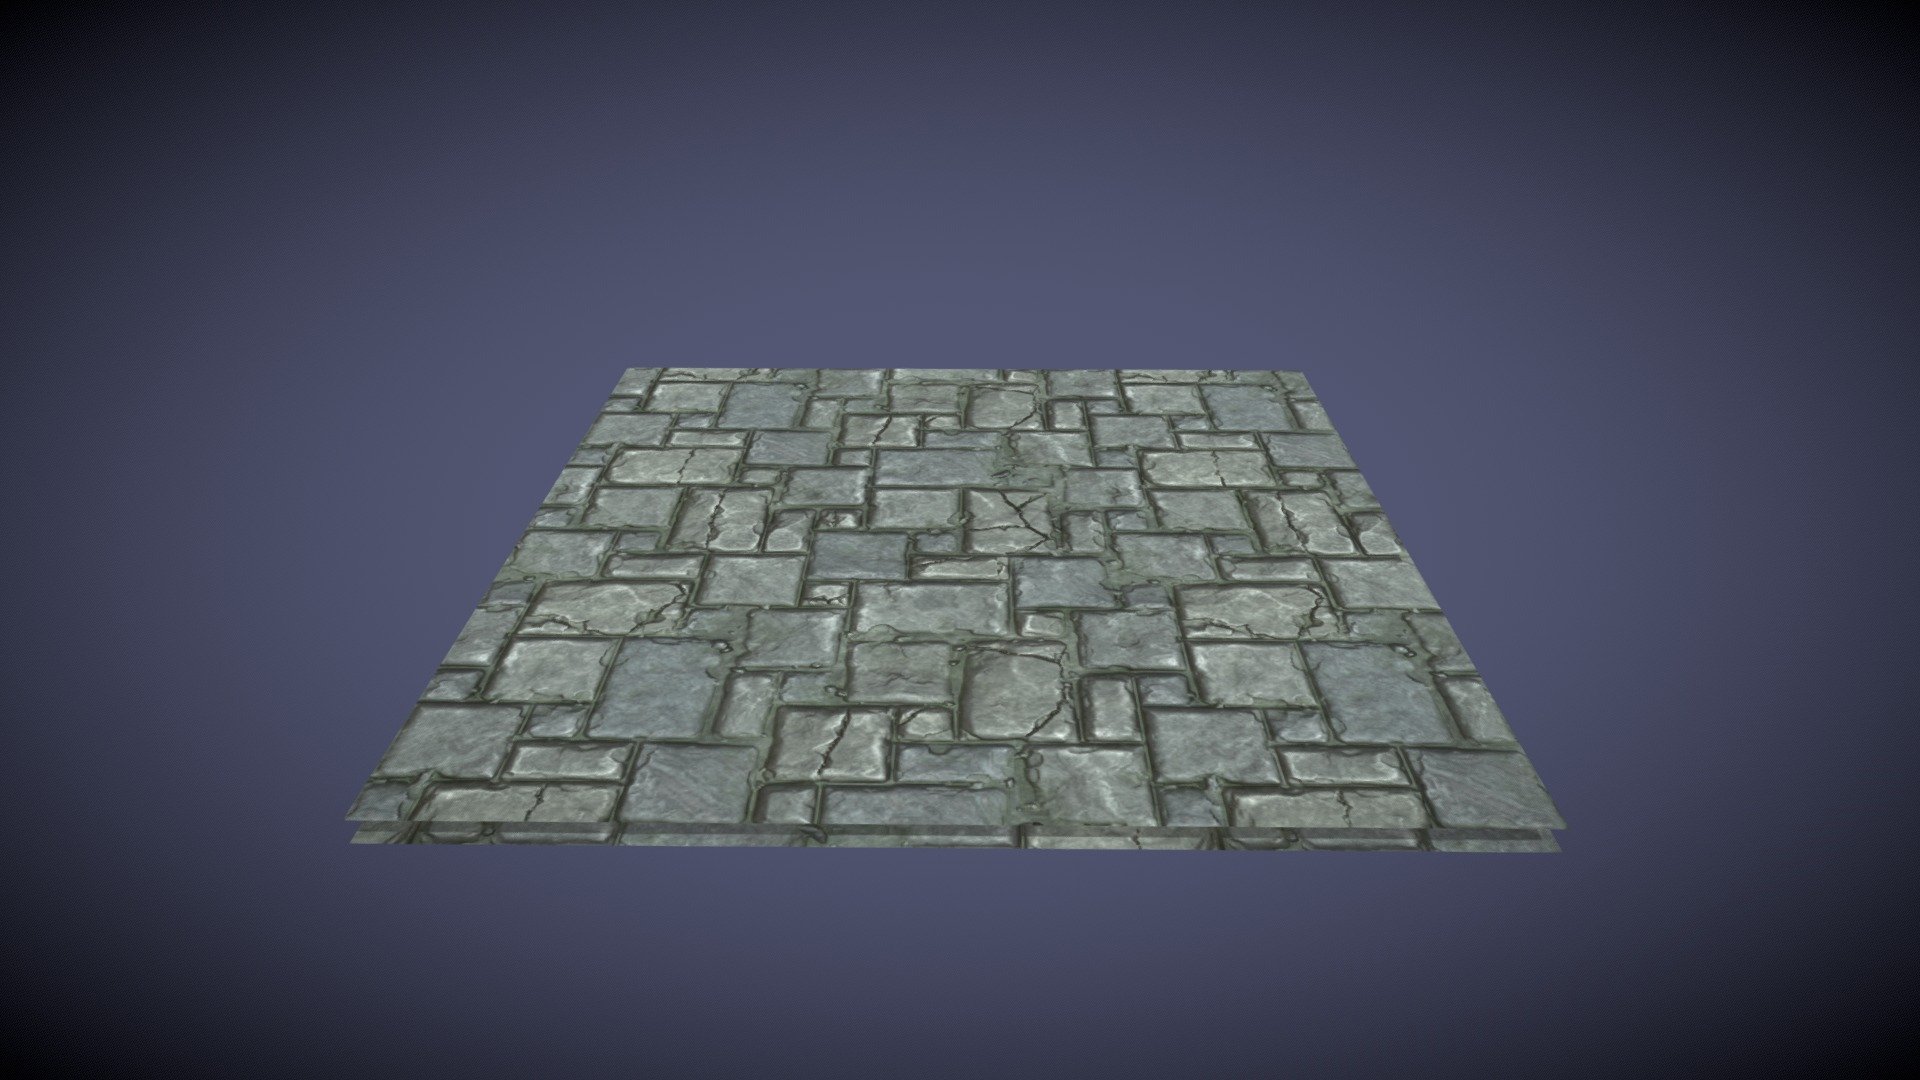 This here is a final model for a floor environment piece. It is just a simple 400u squared with a dungeon tile I found on Adobe Substance materials online. I also created a rocky material to interchange because the developers wanted a cavern area to explore as well 3d model